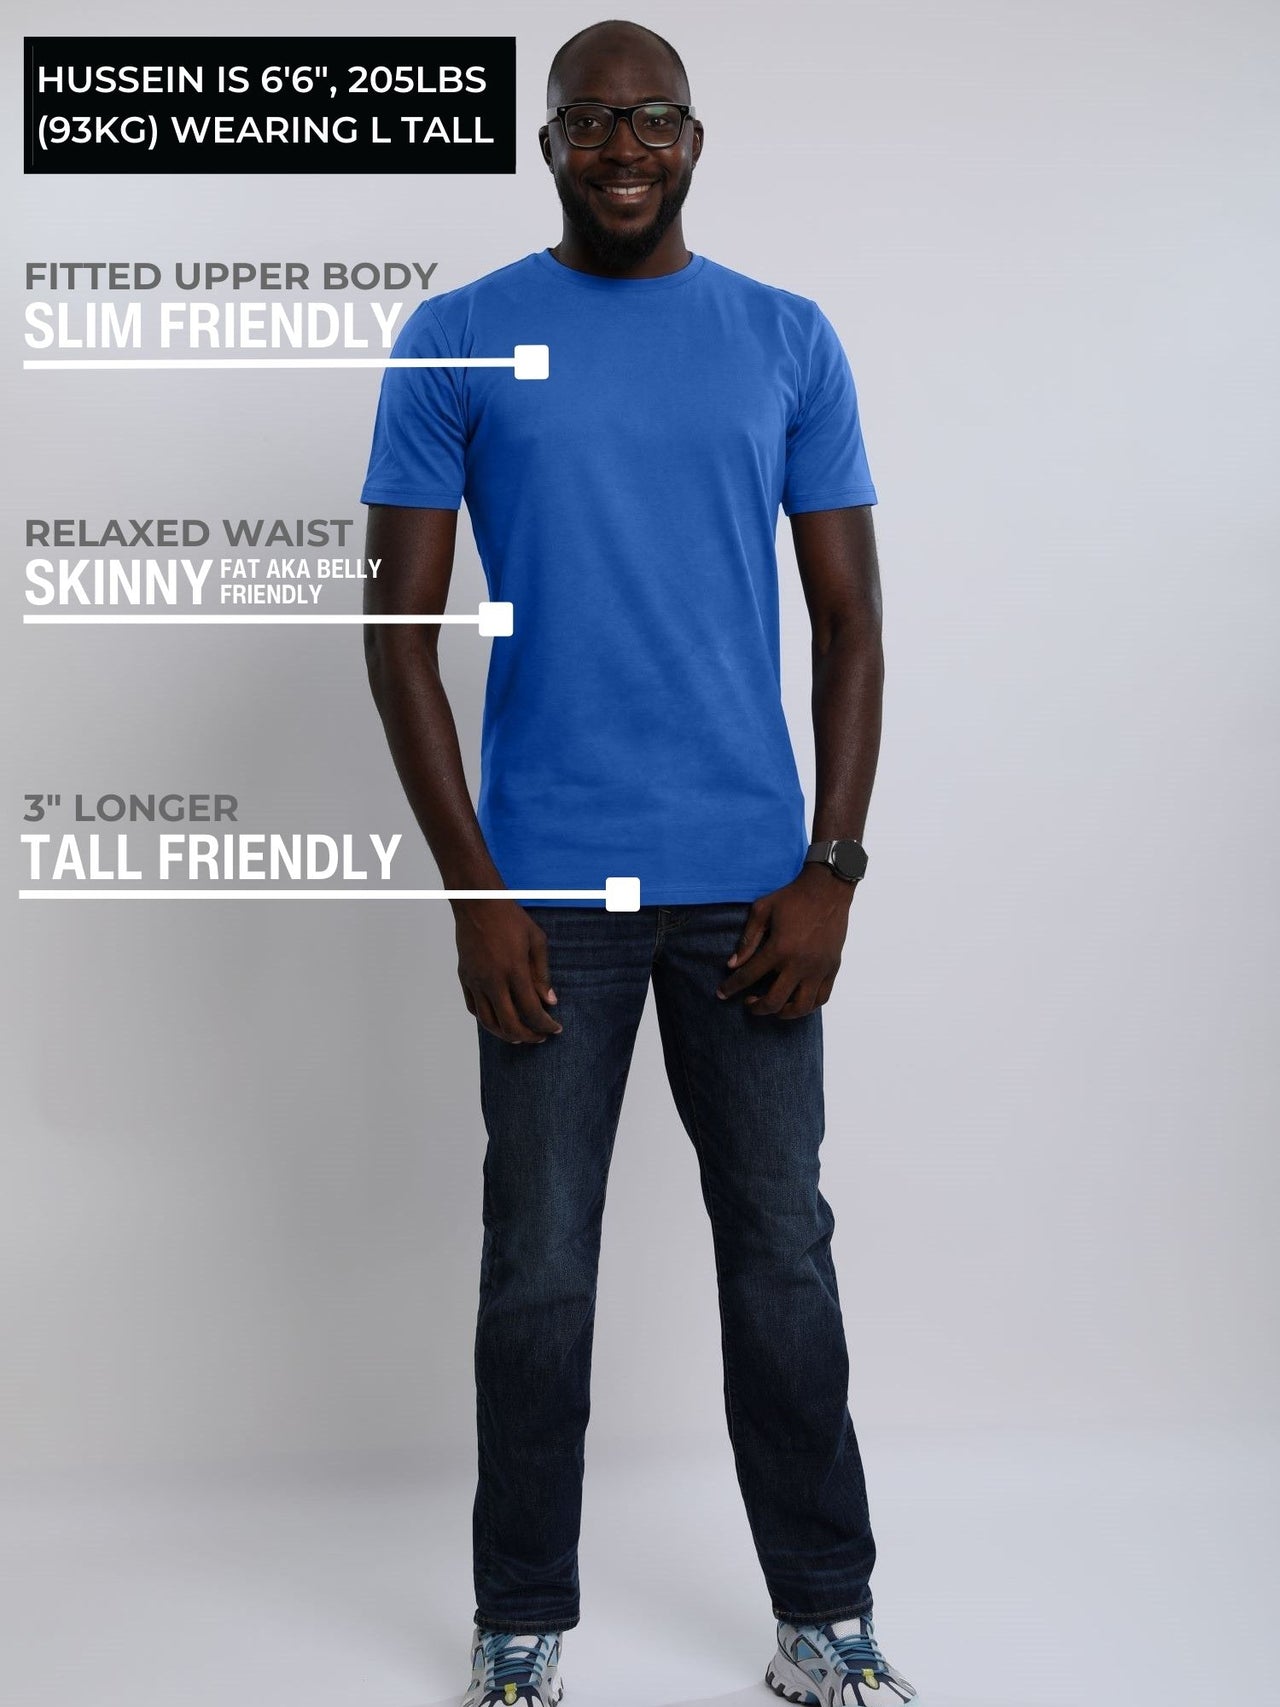 A head to toe shot of a tall athletic guy wearing a medium blue large tall t-shirt.